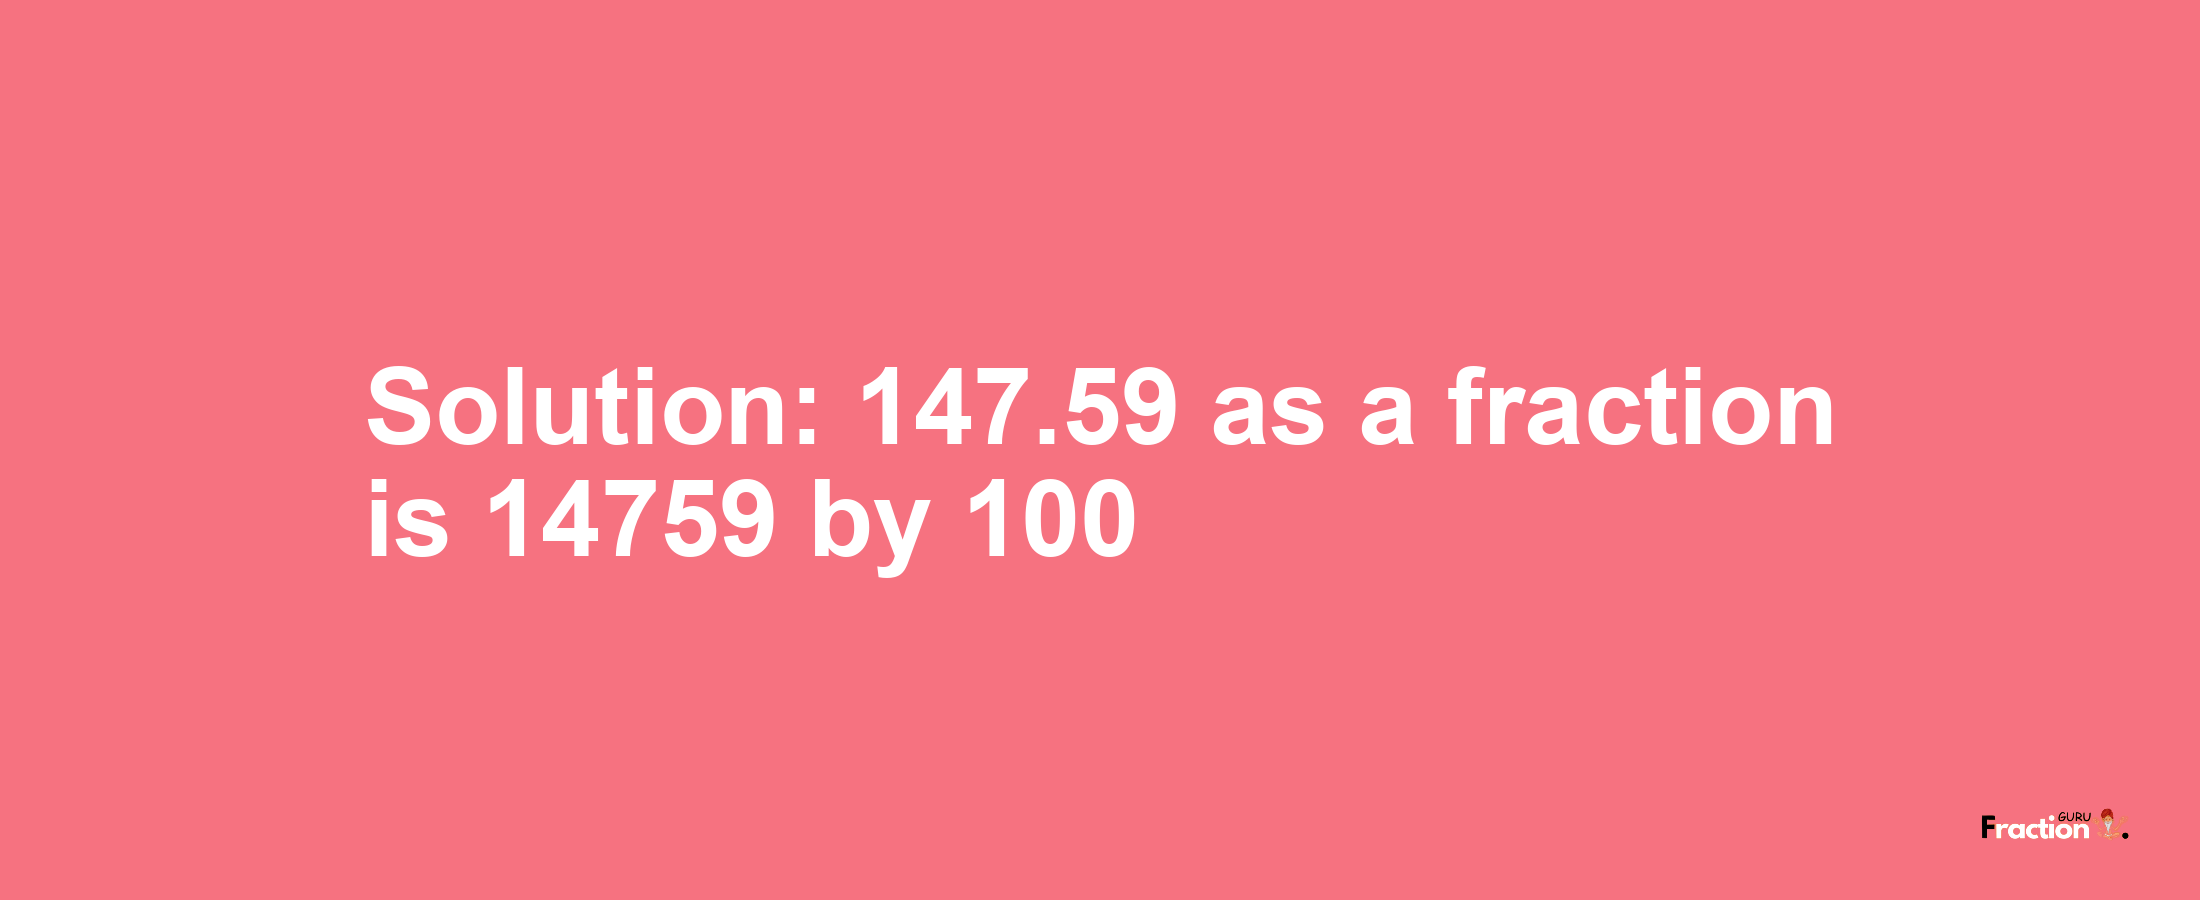 Solution:147.59 as a fraction is 14759/100